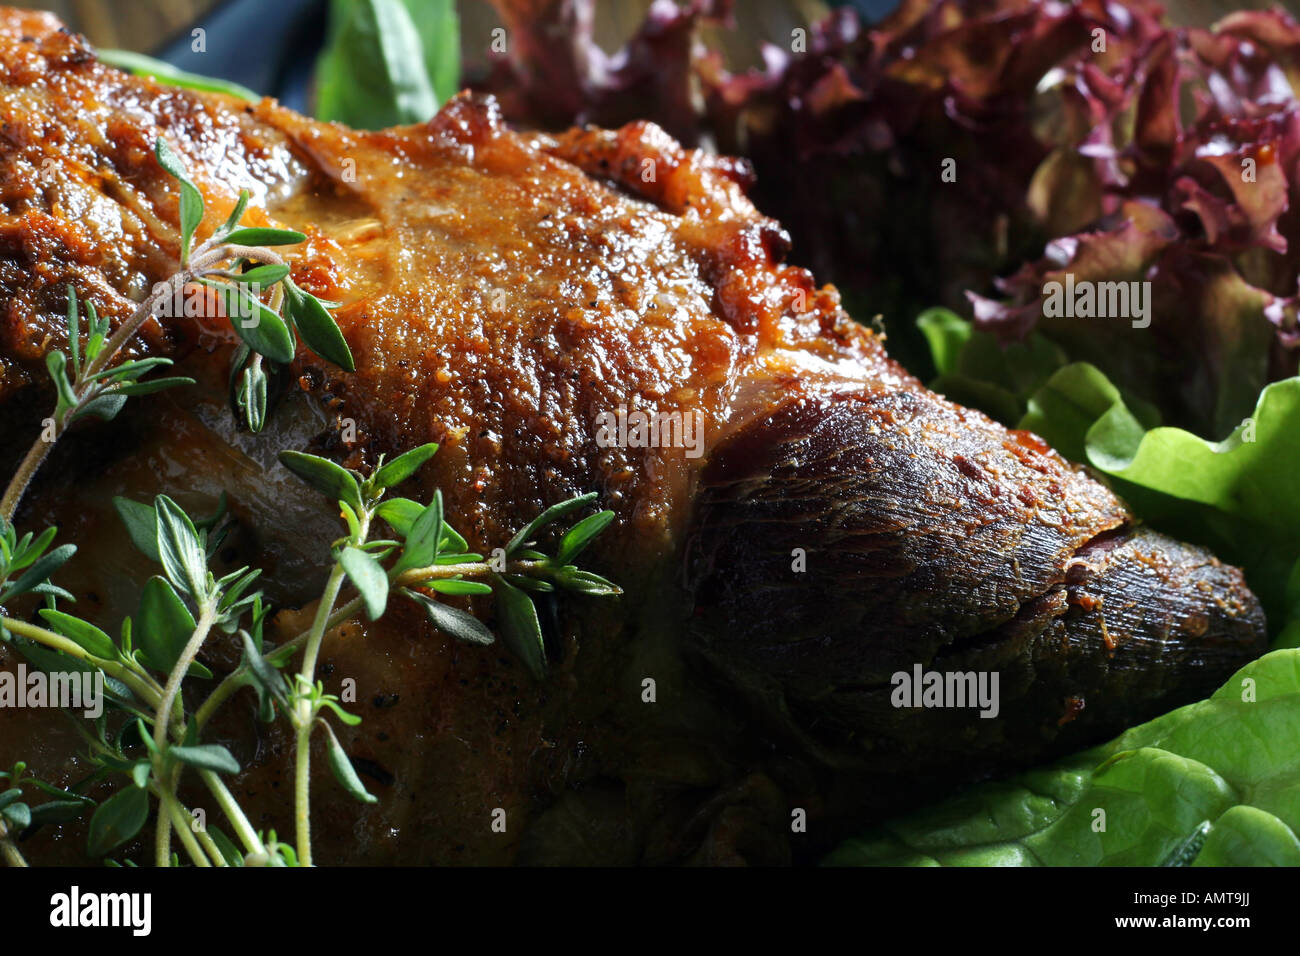 Fired mutton meat detail and close up with vegetable Stock Photo